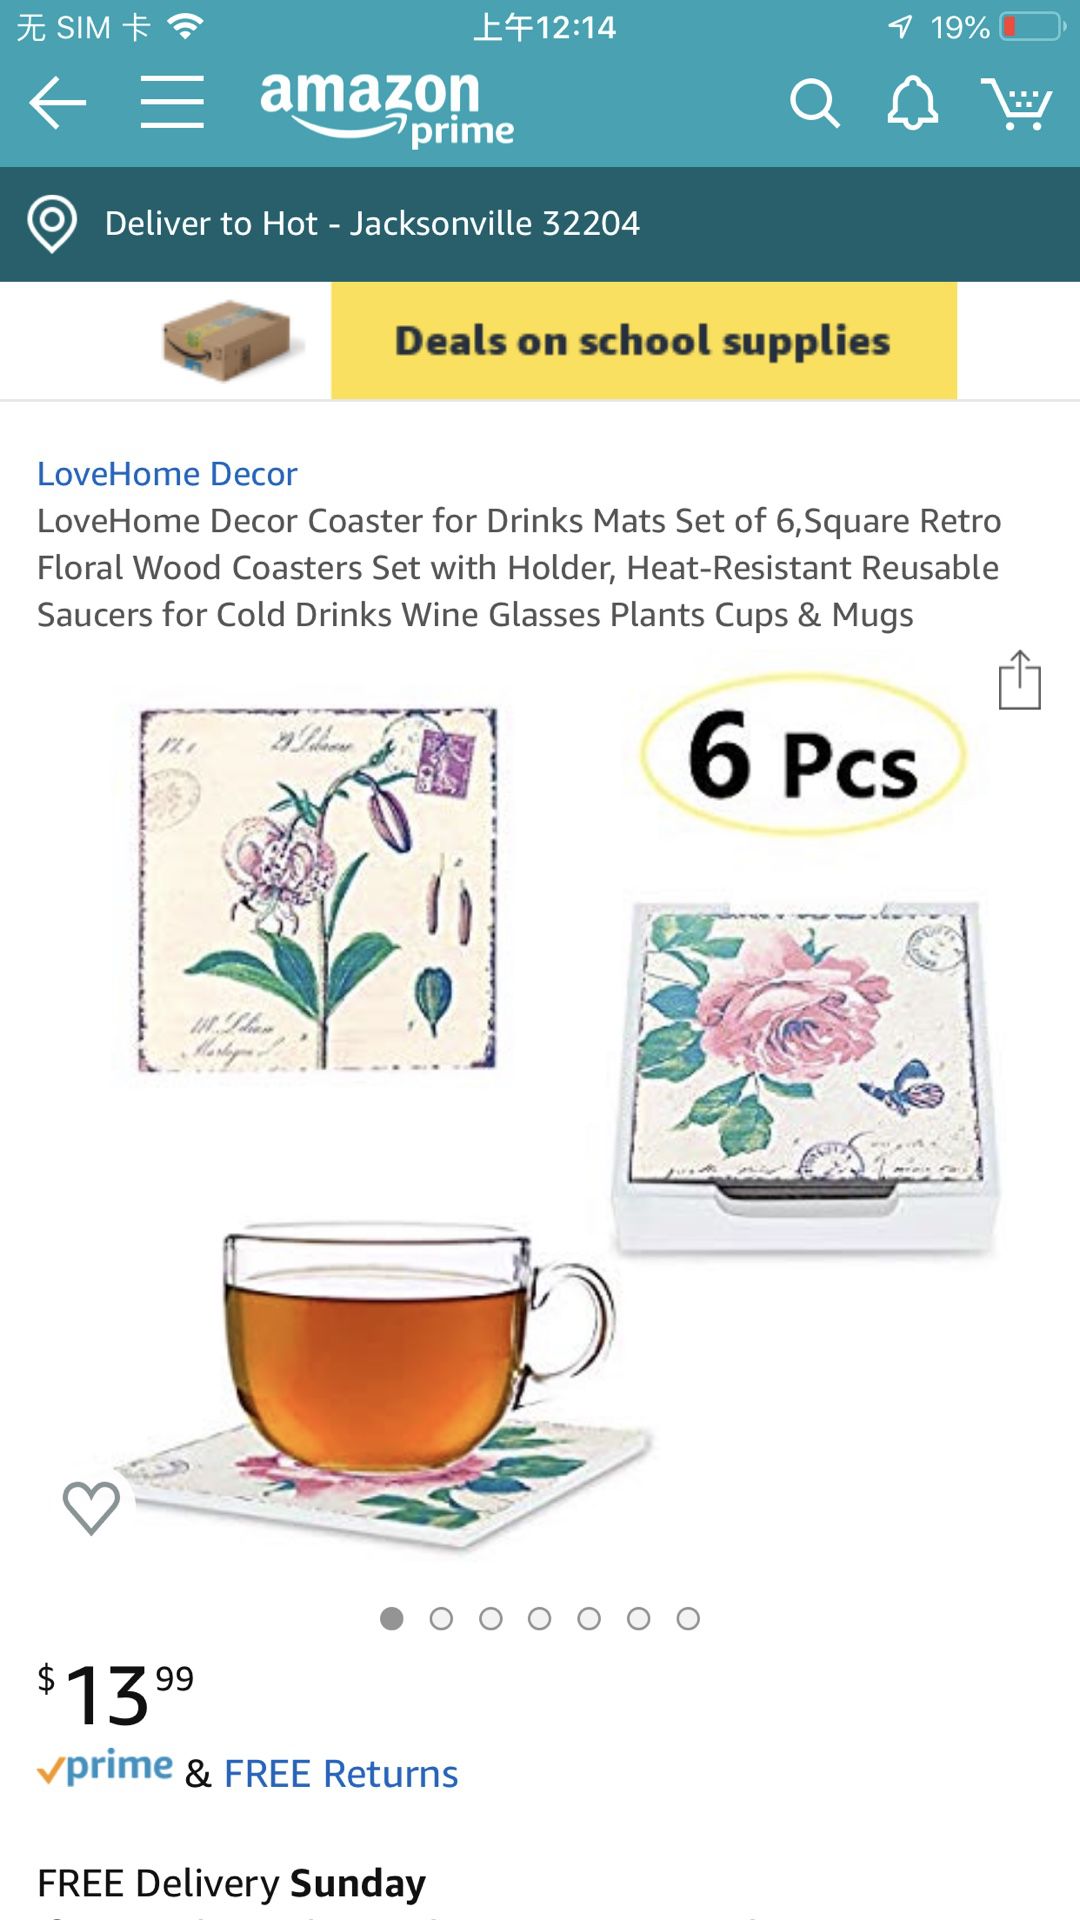 Brand new LoveHome Decor Coaster for Drinks Mats Set of 6,Square Retro Floral Wood Coasters Set with Holder,